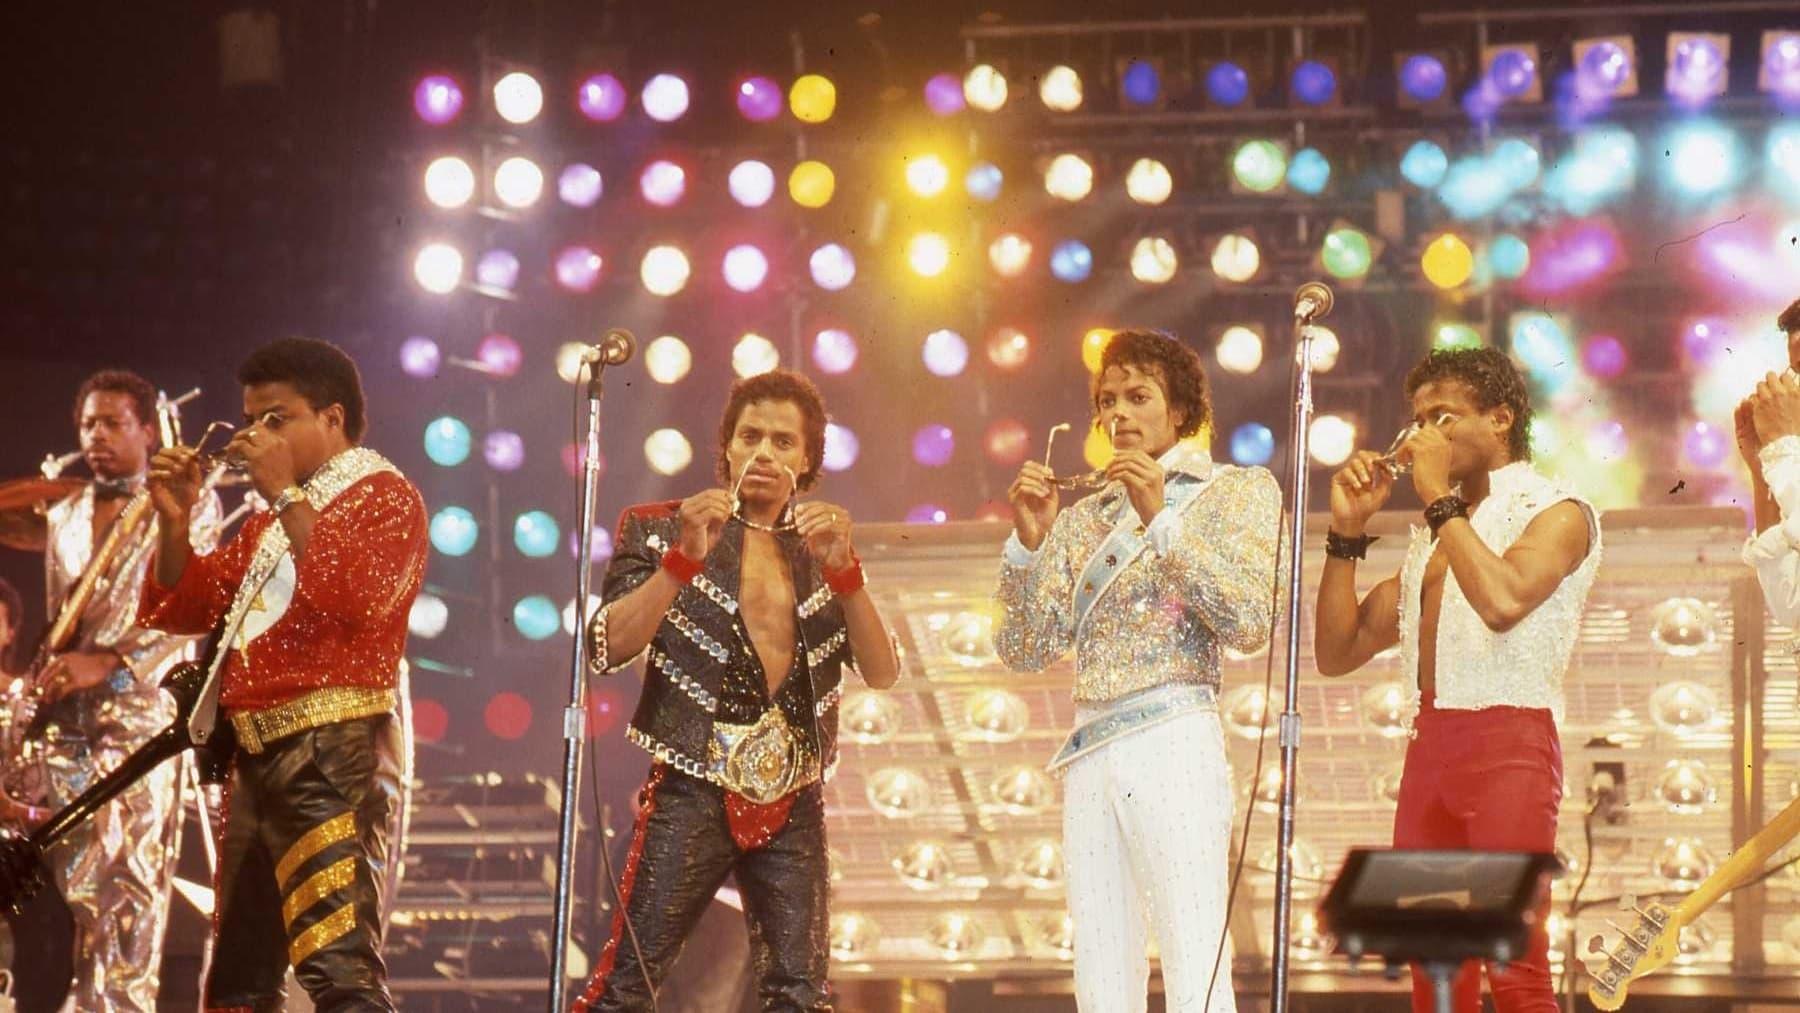 The Jacksons Live At Toronto 1984 - Victory Tour backdrop